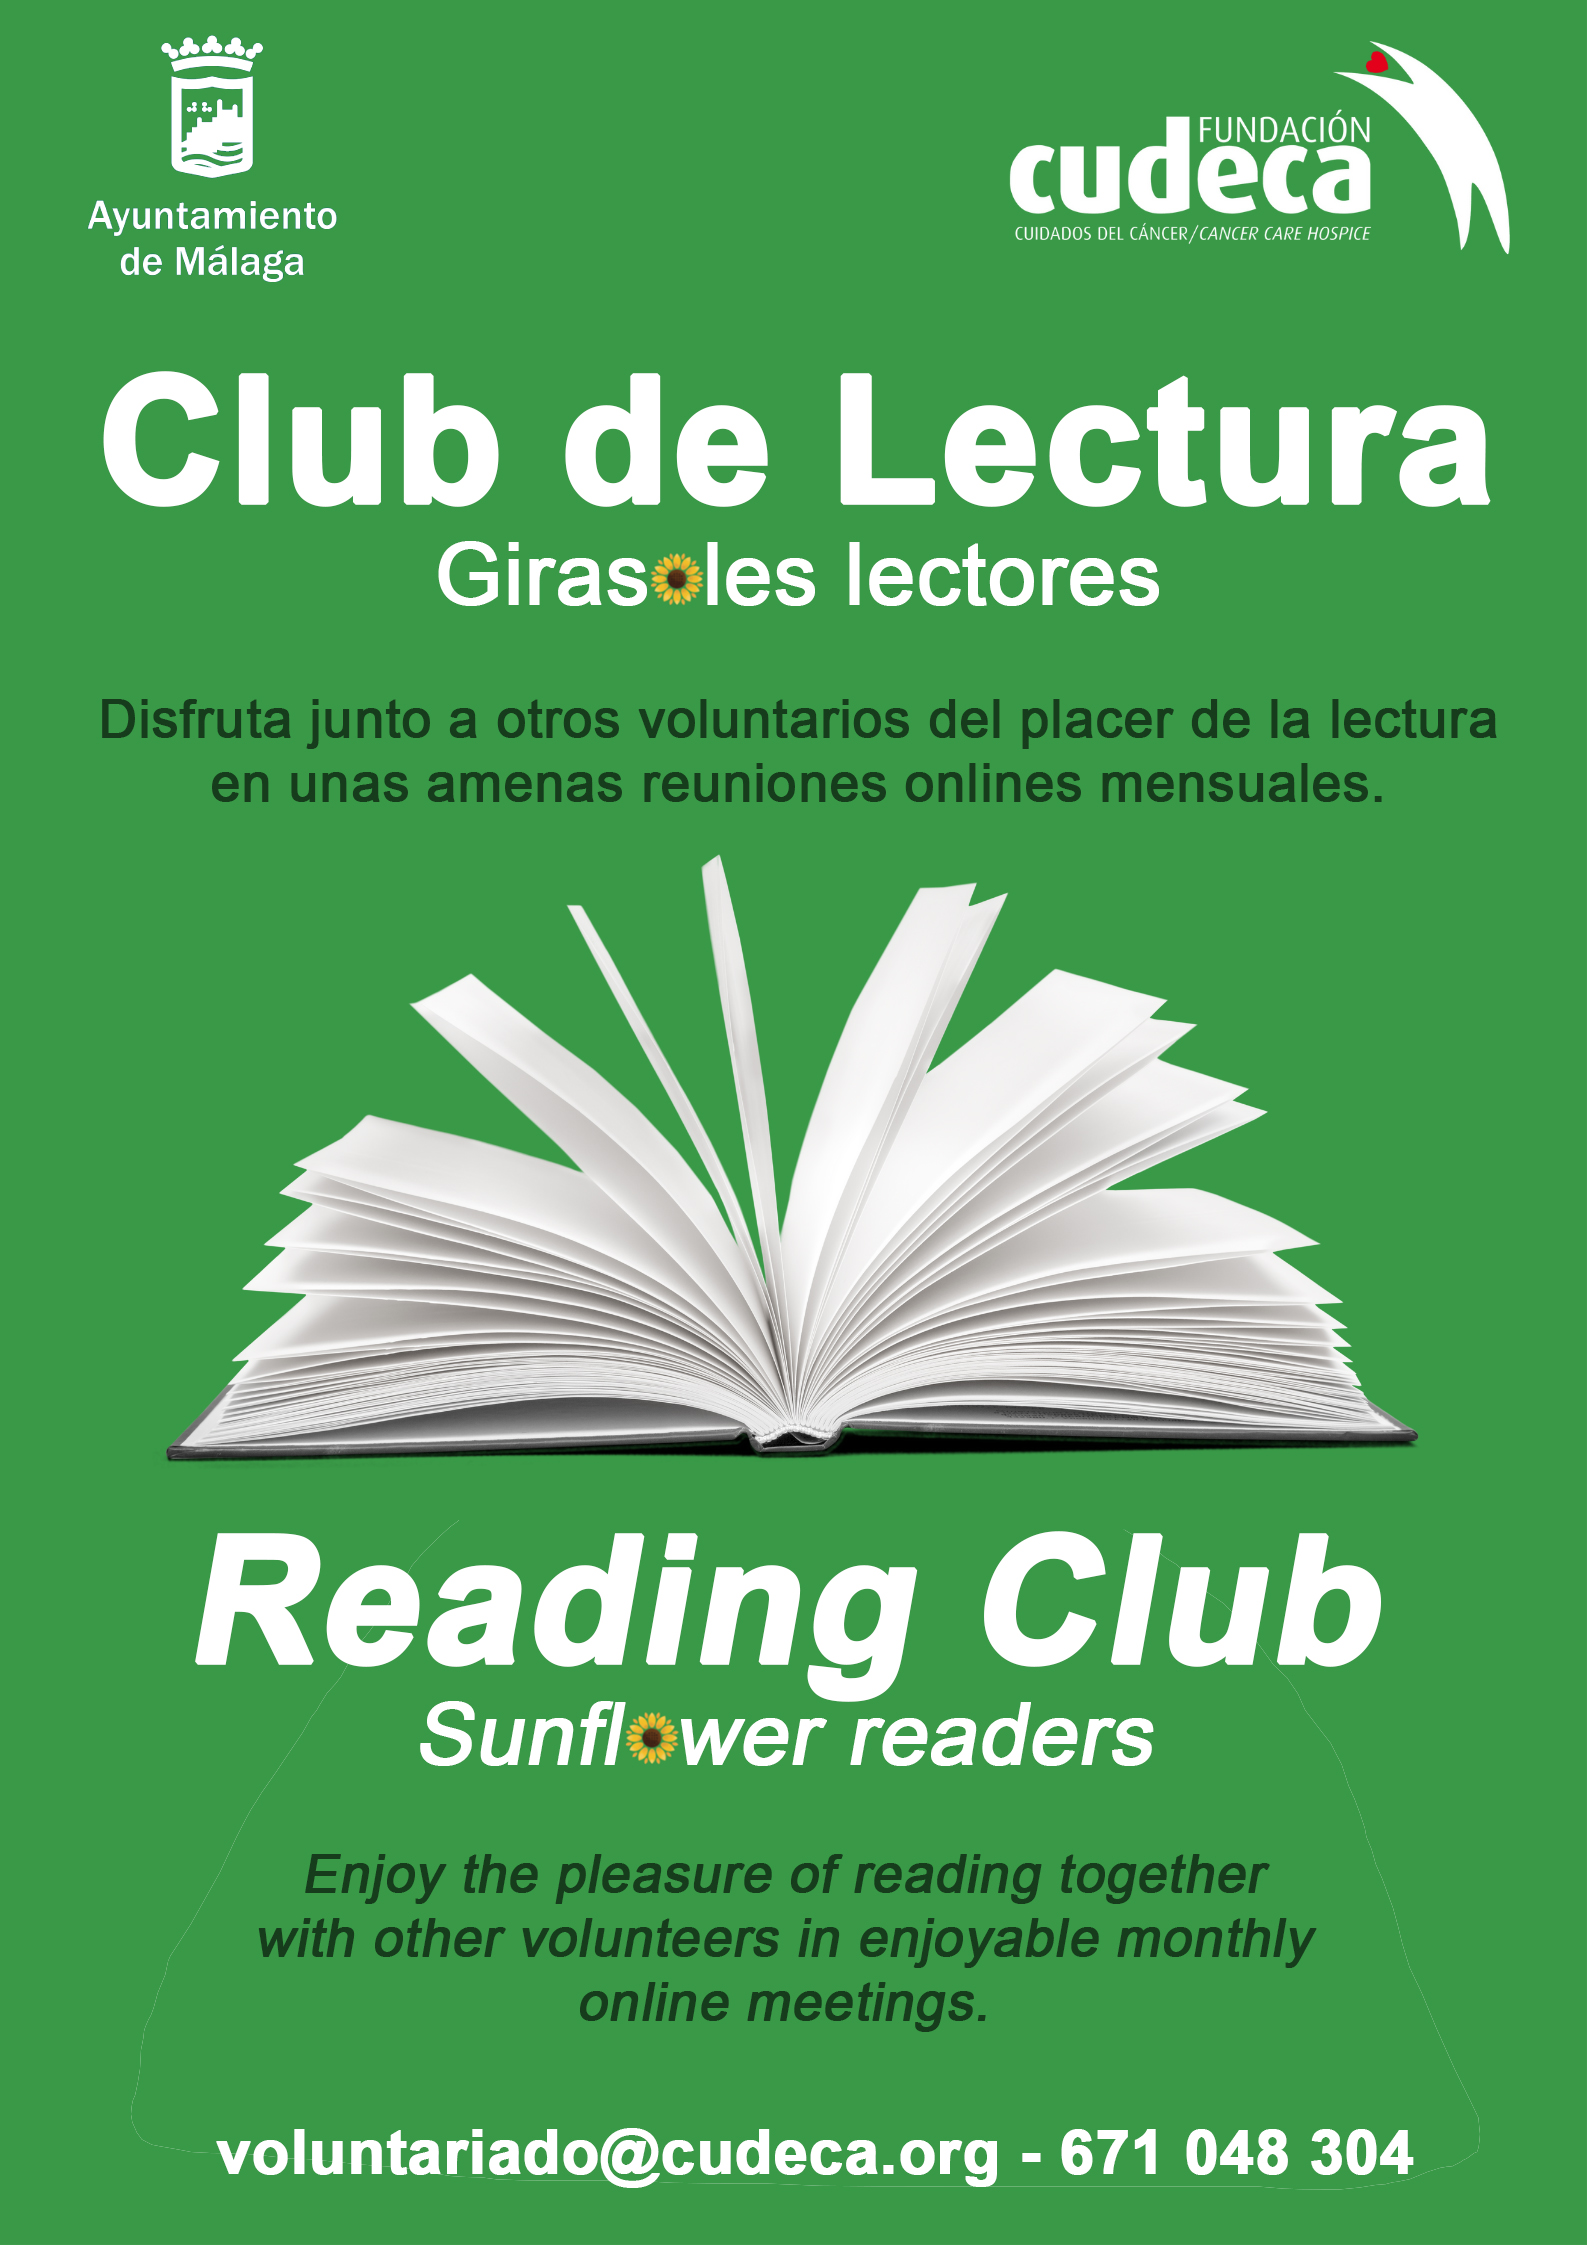 Join the Cudeca´s Reading Club!